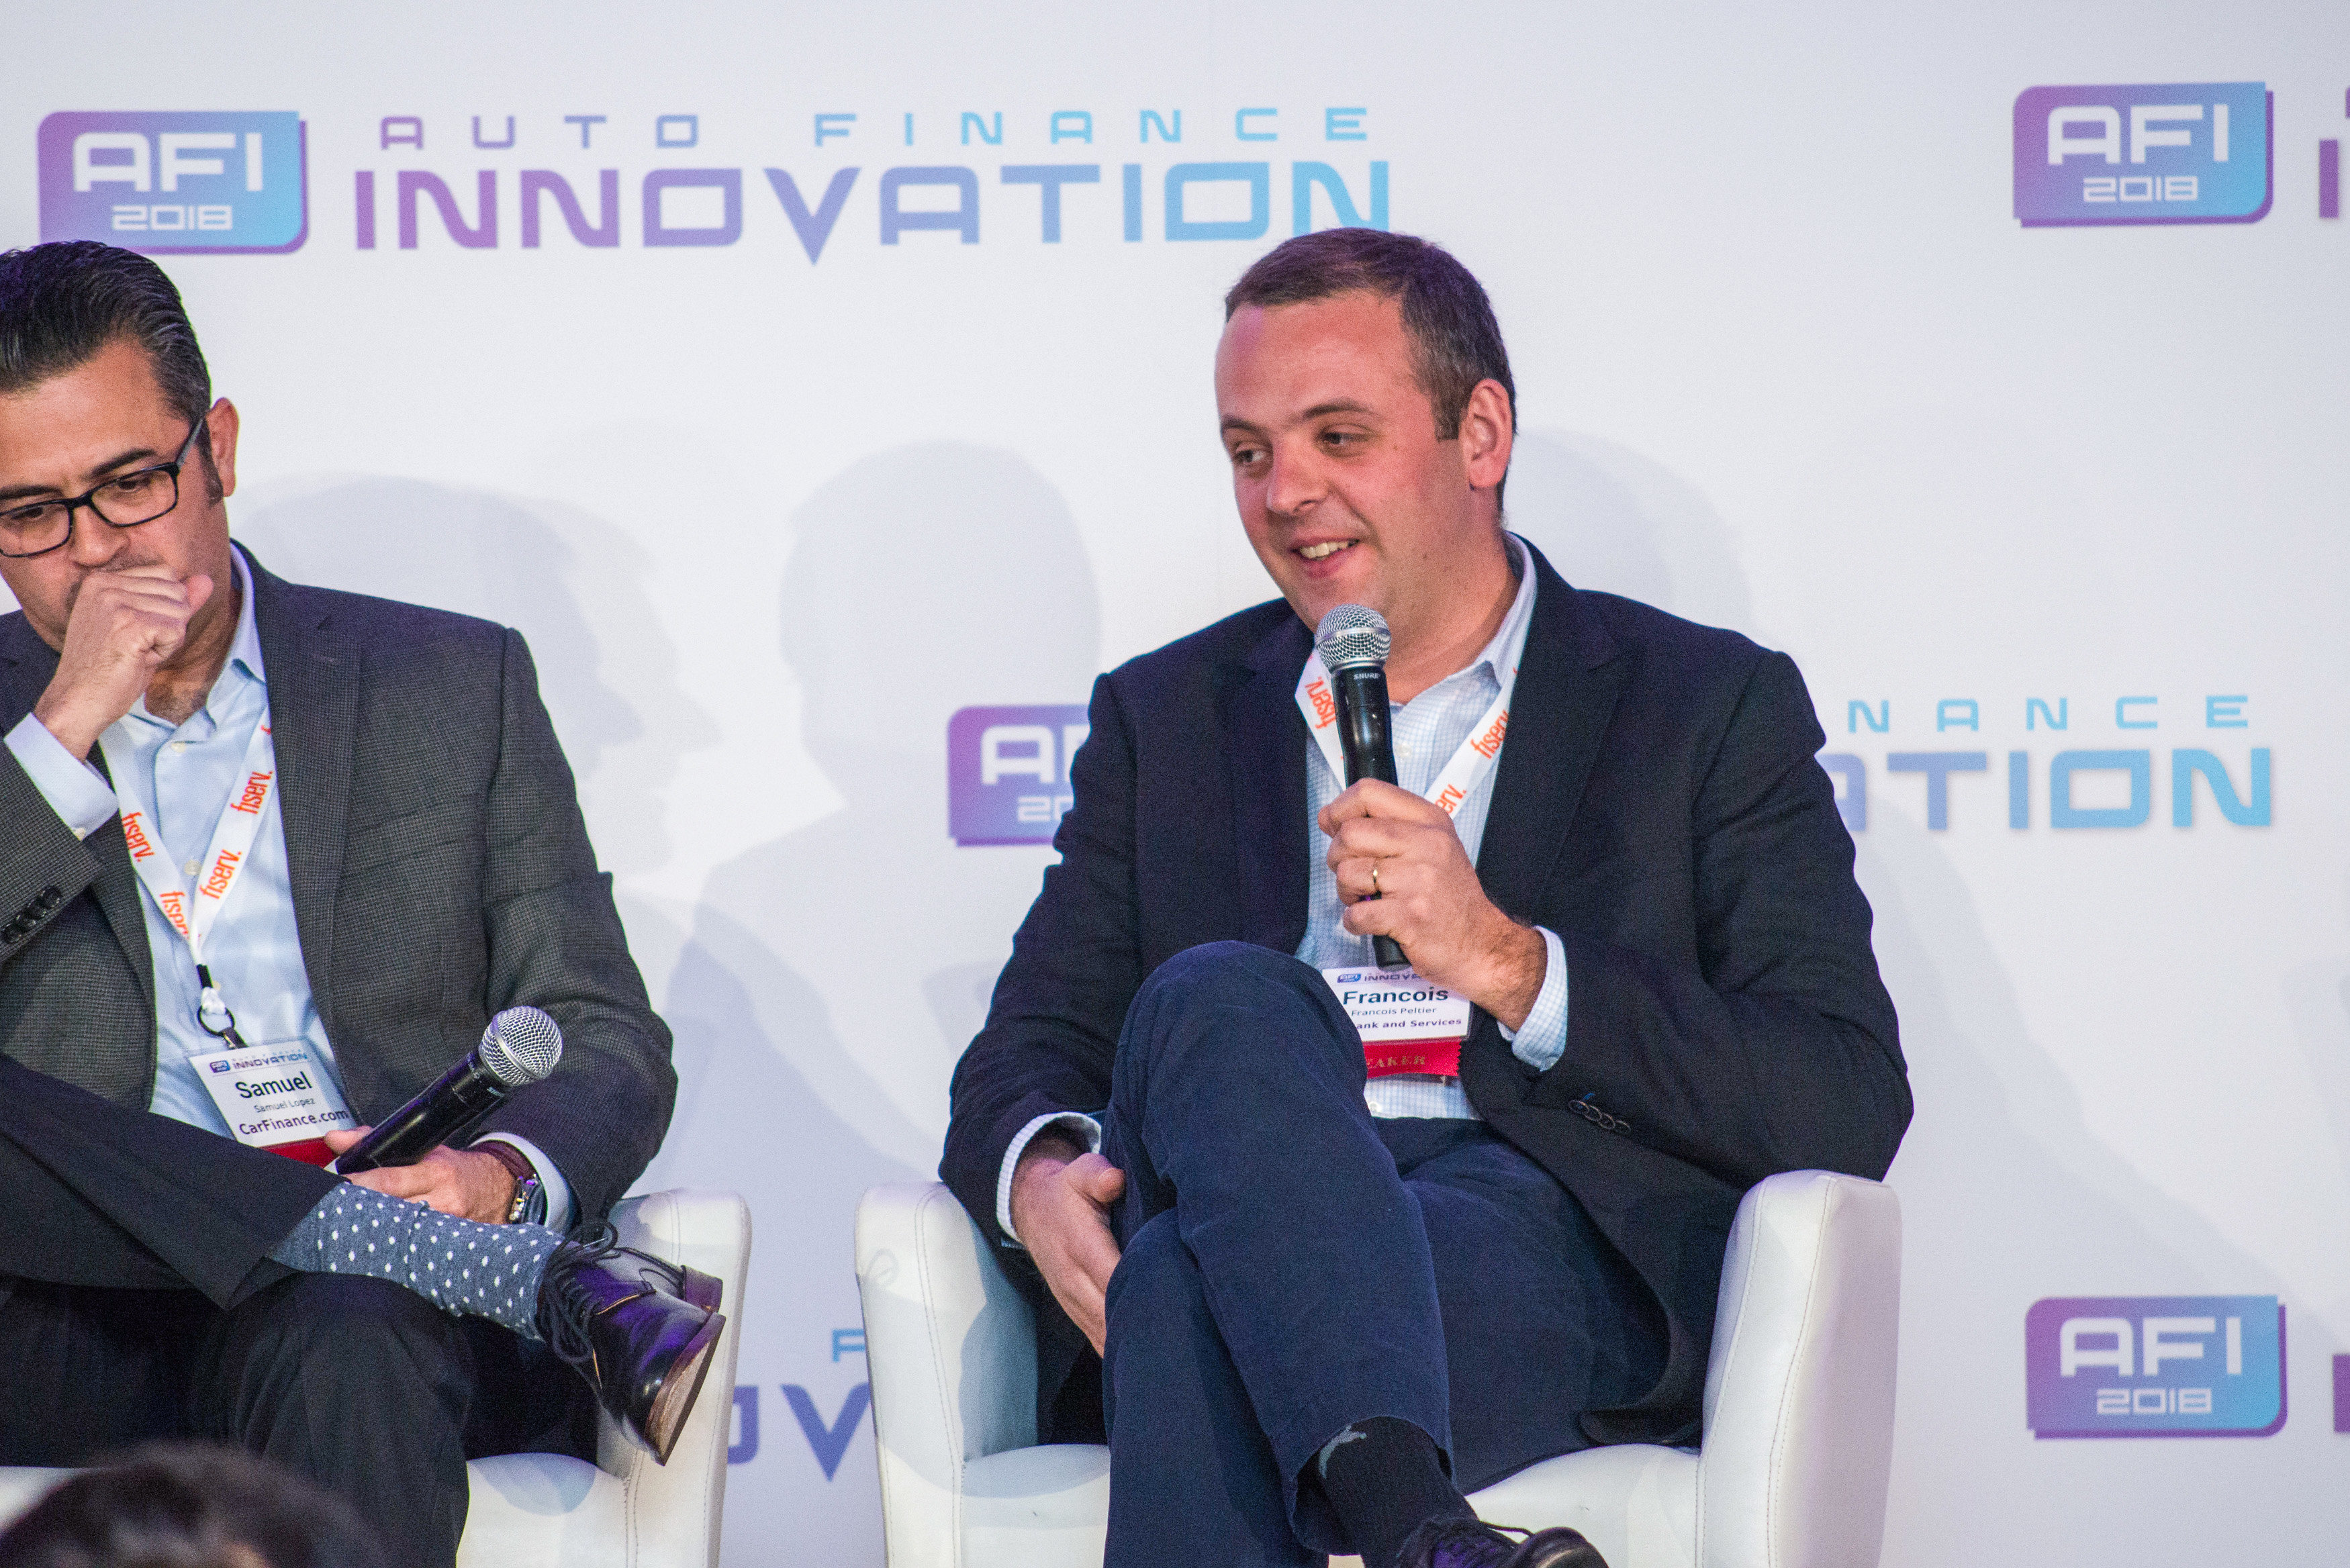 Francois Peltier, vice president of open innovation at RCI Bank and Services, joins a panel on direct lending at Auto Finance Innovation 2018 in San Francisco. (Photo by Lensology.net)